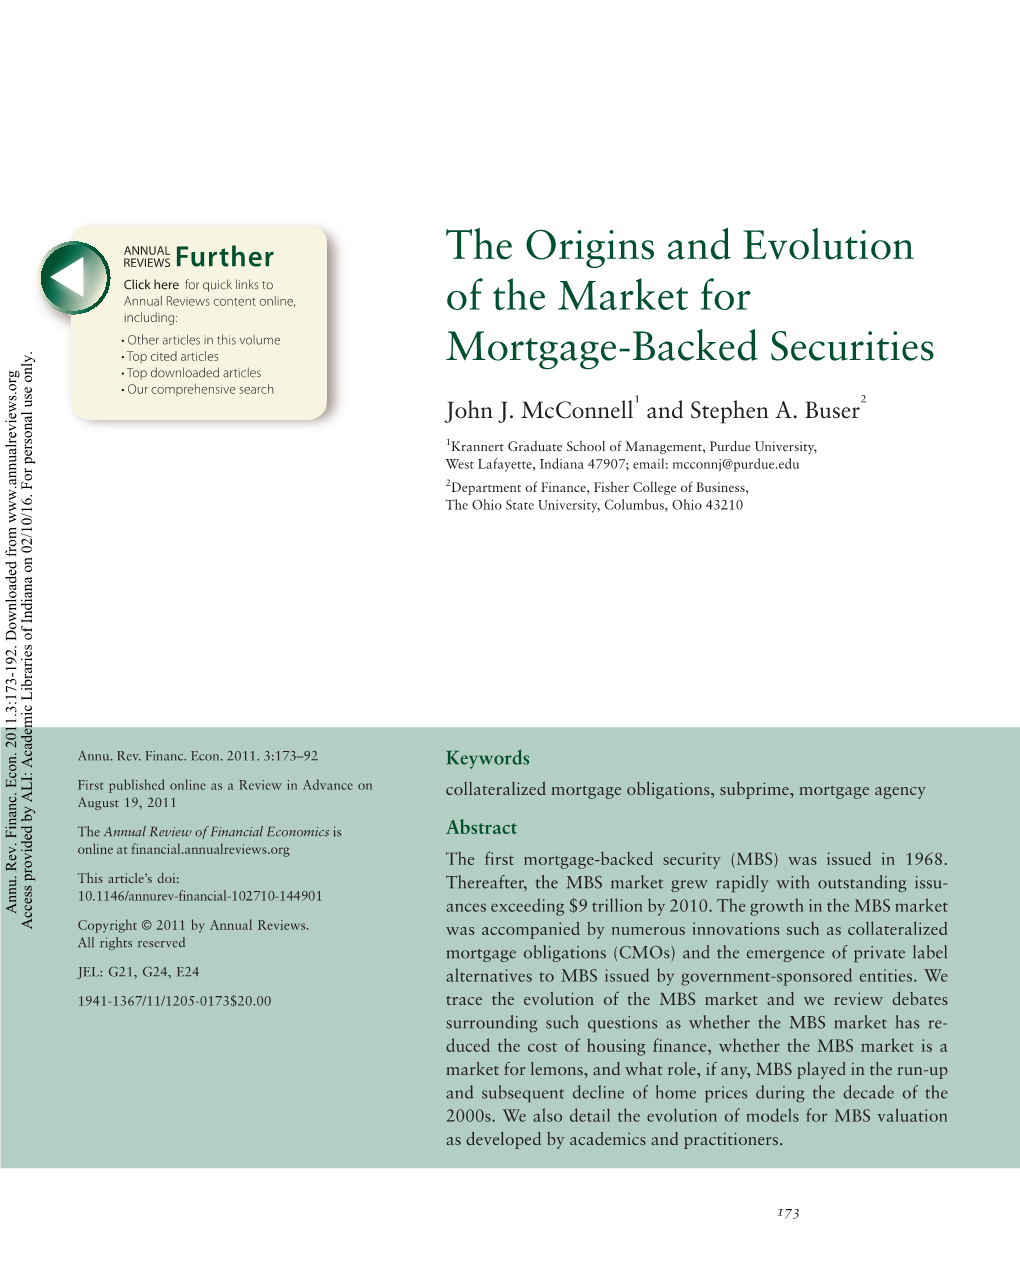 The Origins and Evolution of the Market for Mortgage-Backed Securities